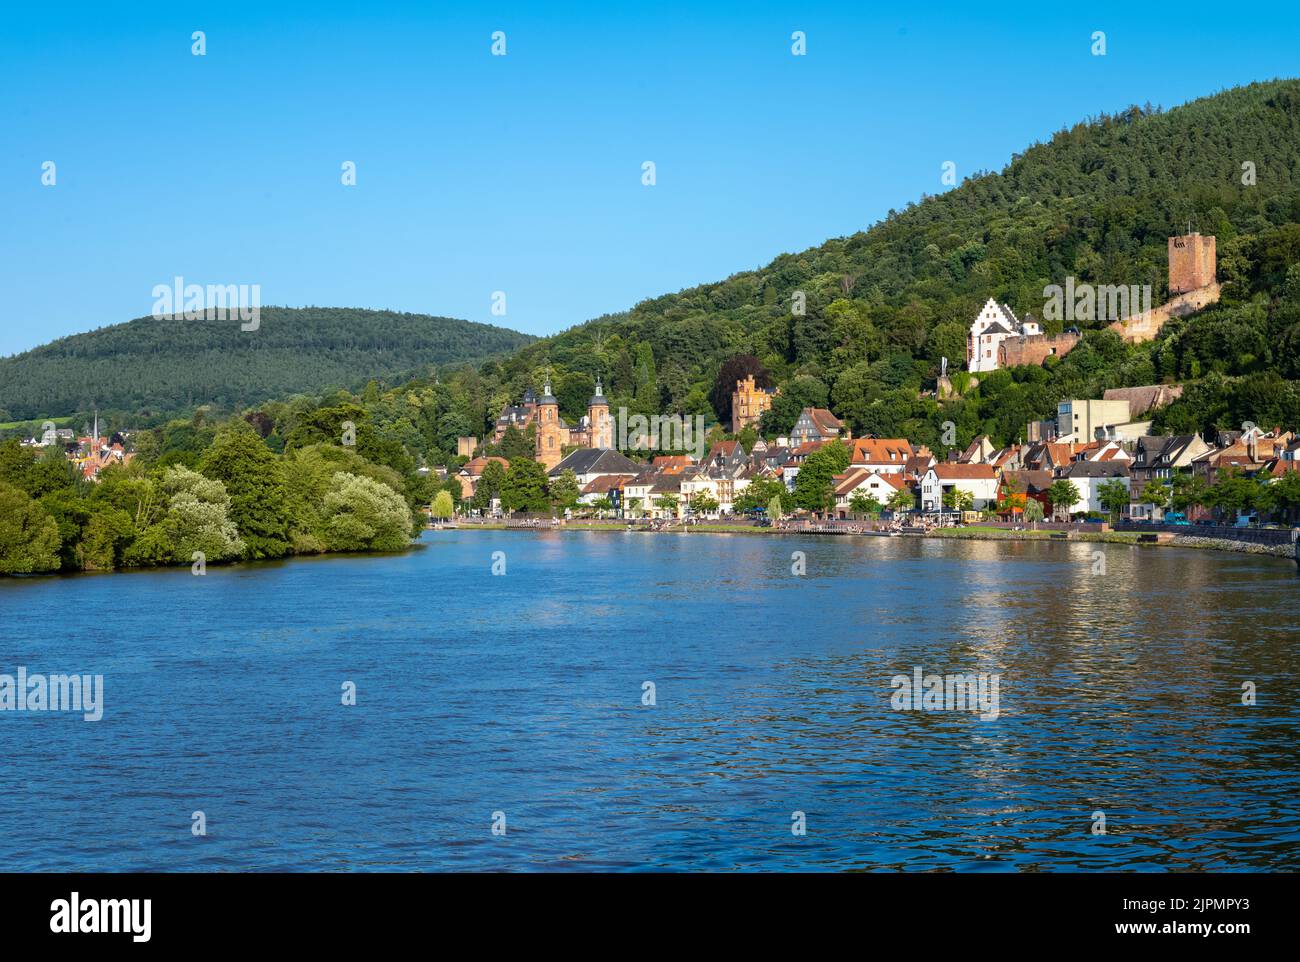 Germany, Miltenberg, the old town seen from the River Main Stock Photo